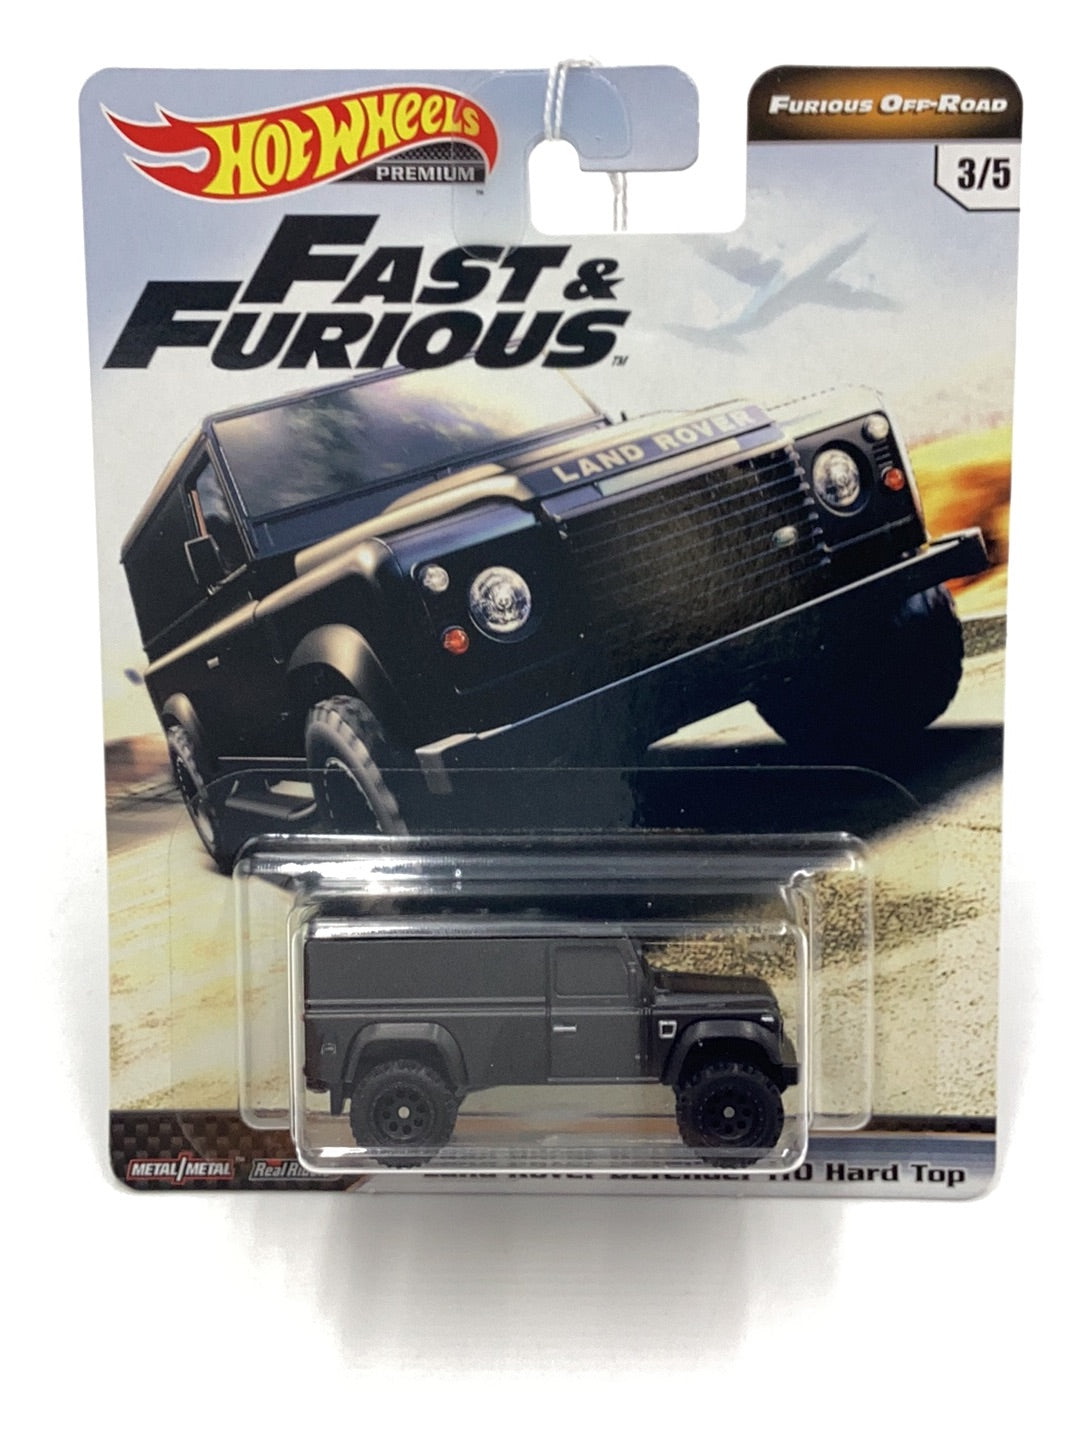 Hot Wheels fast and furious off road Land Rover Defender 110 Hard Top 251I